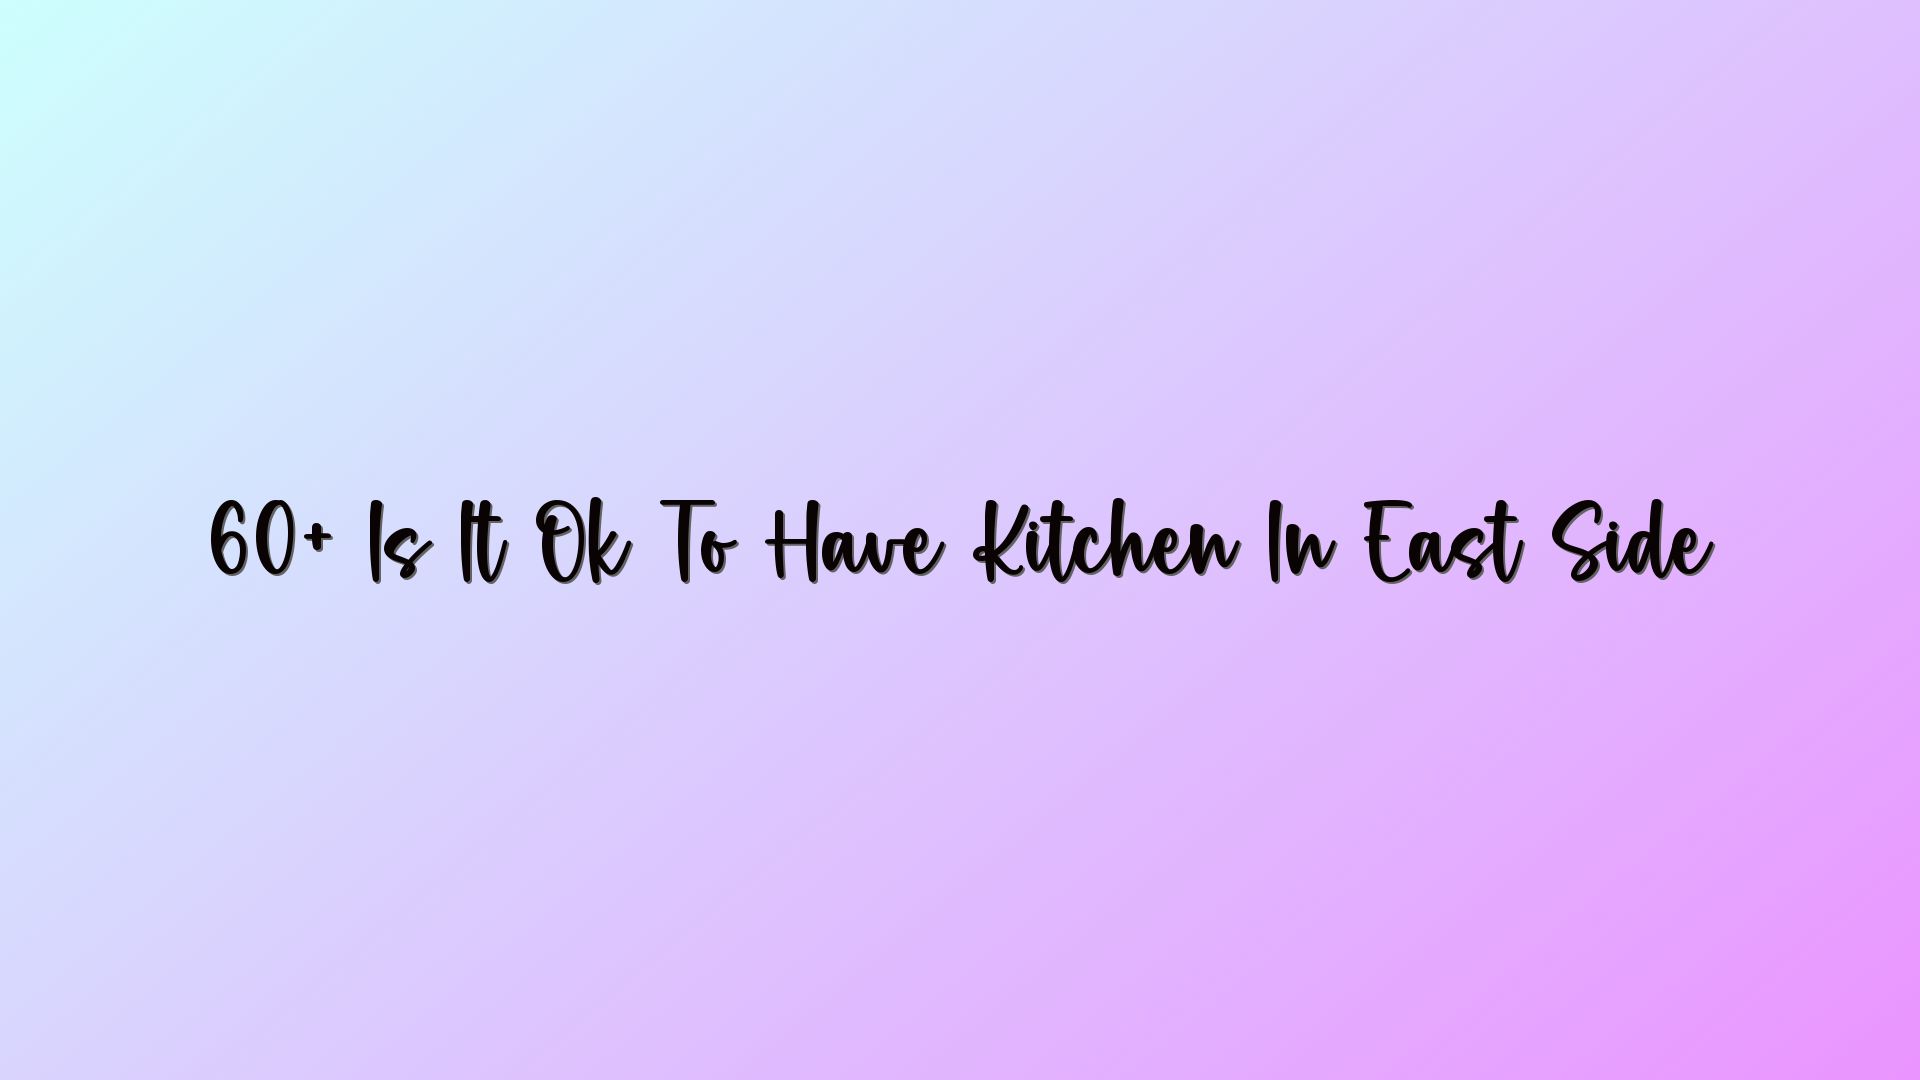 60+ Is It Ok To Have Kitchen In East Side